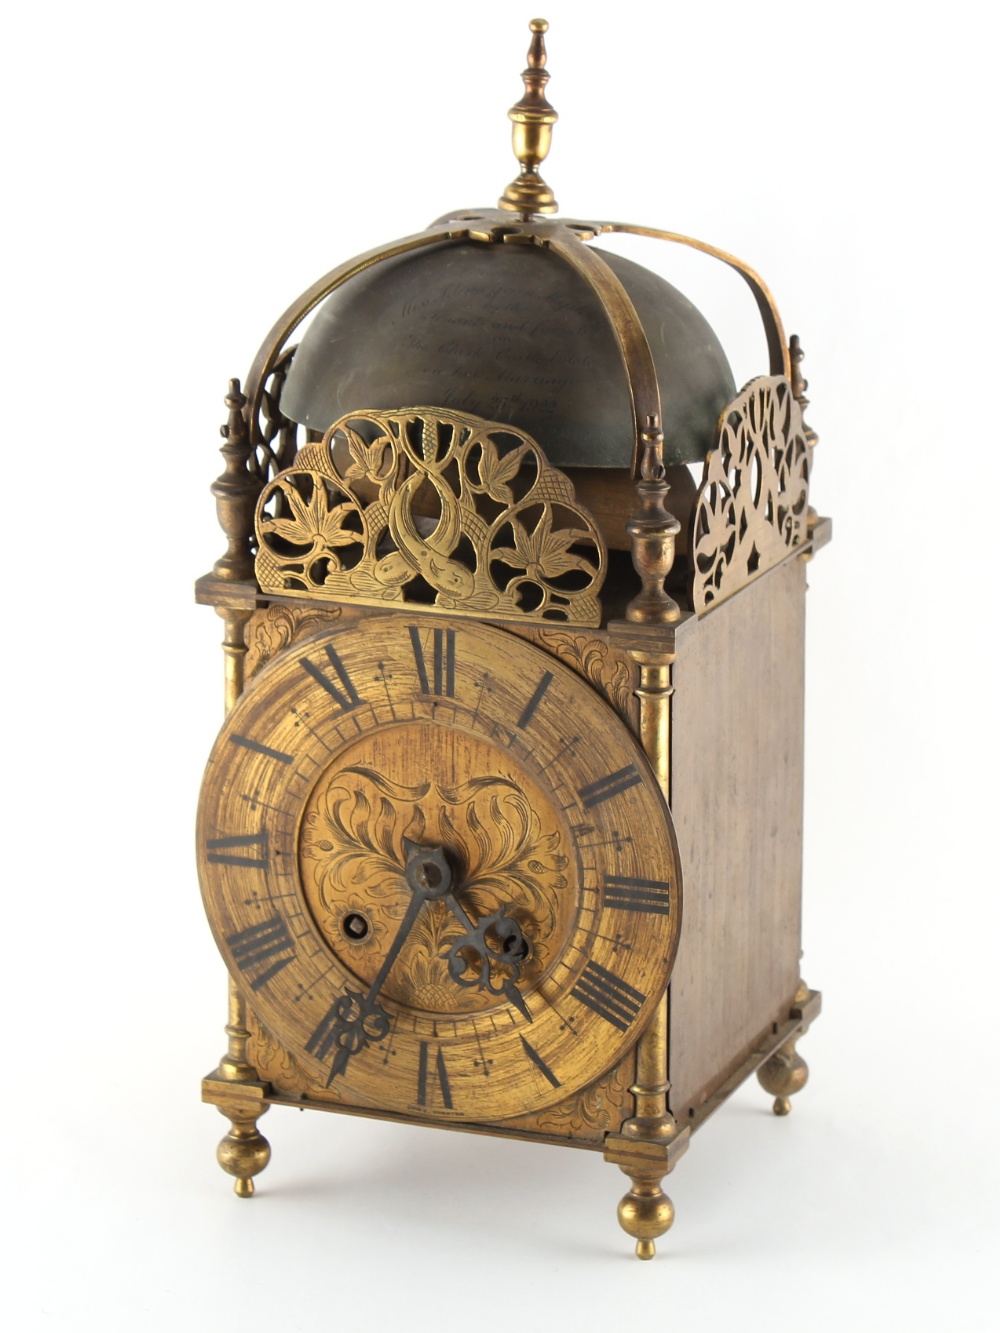 Property of a lady of title - a large early 20th century J.J. Elliott brass lantern clock, the two